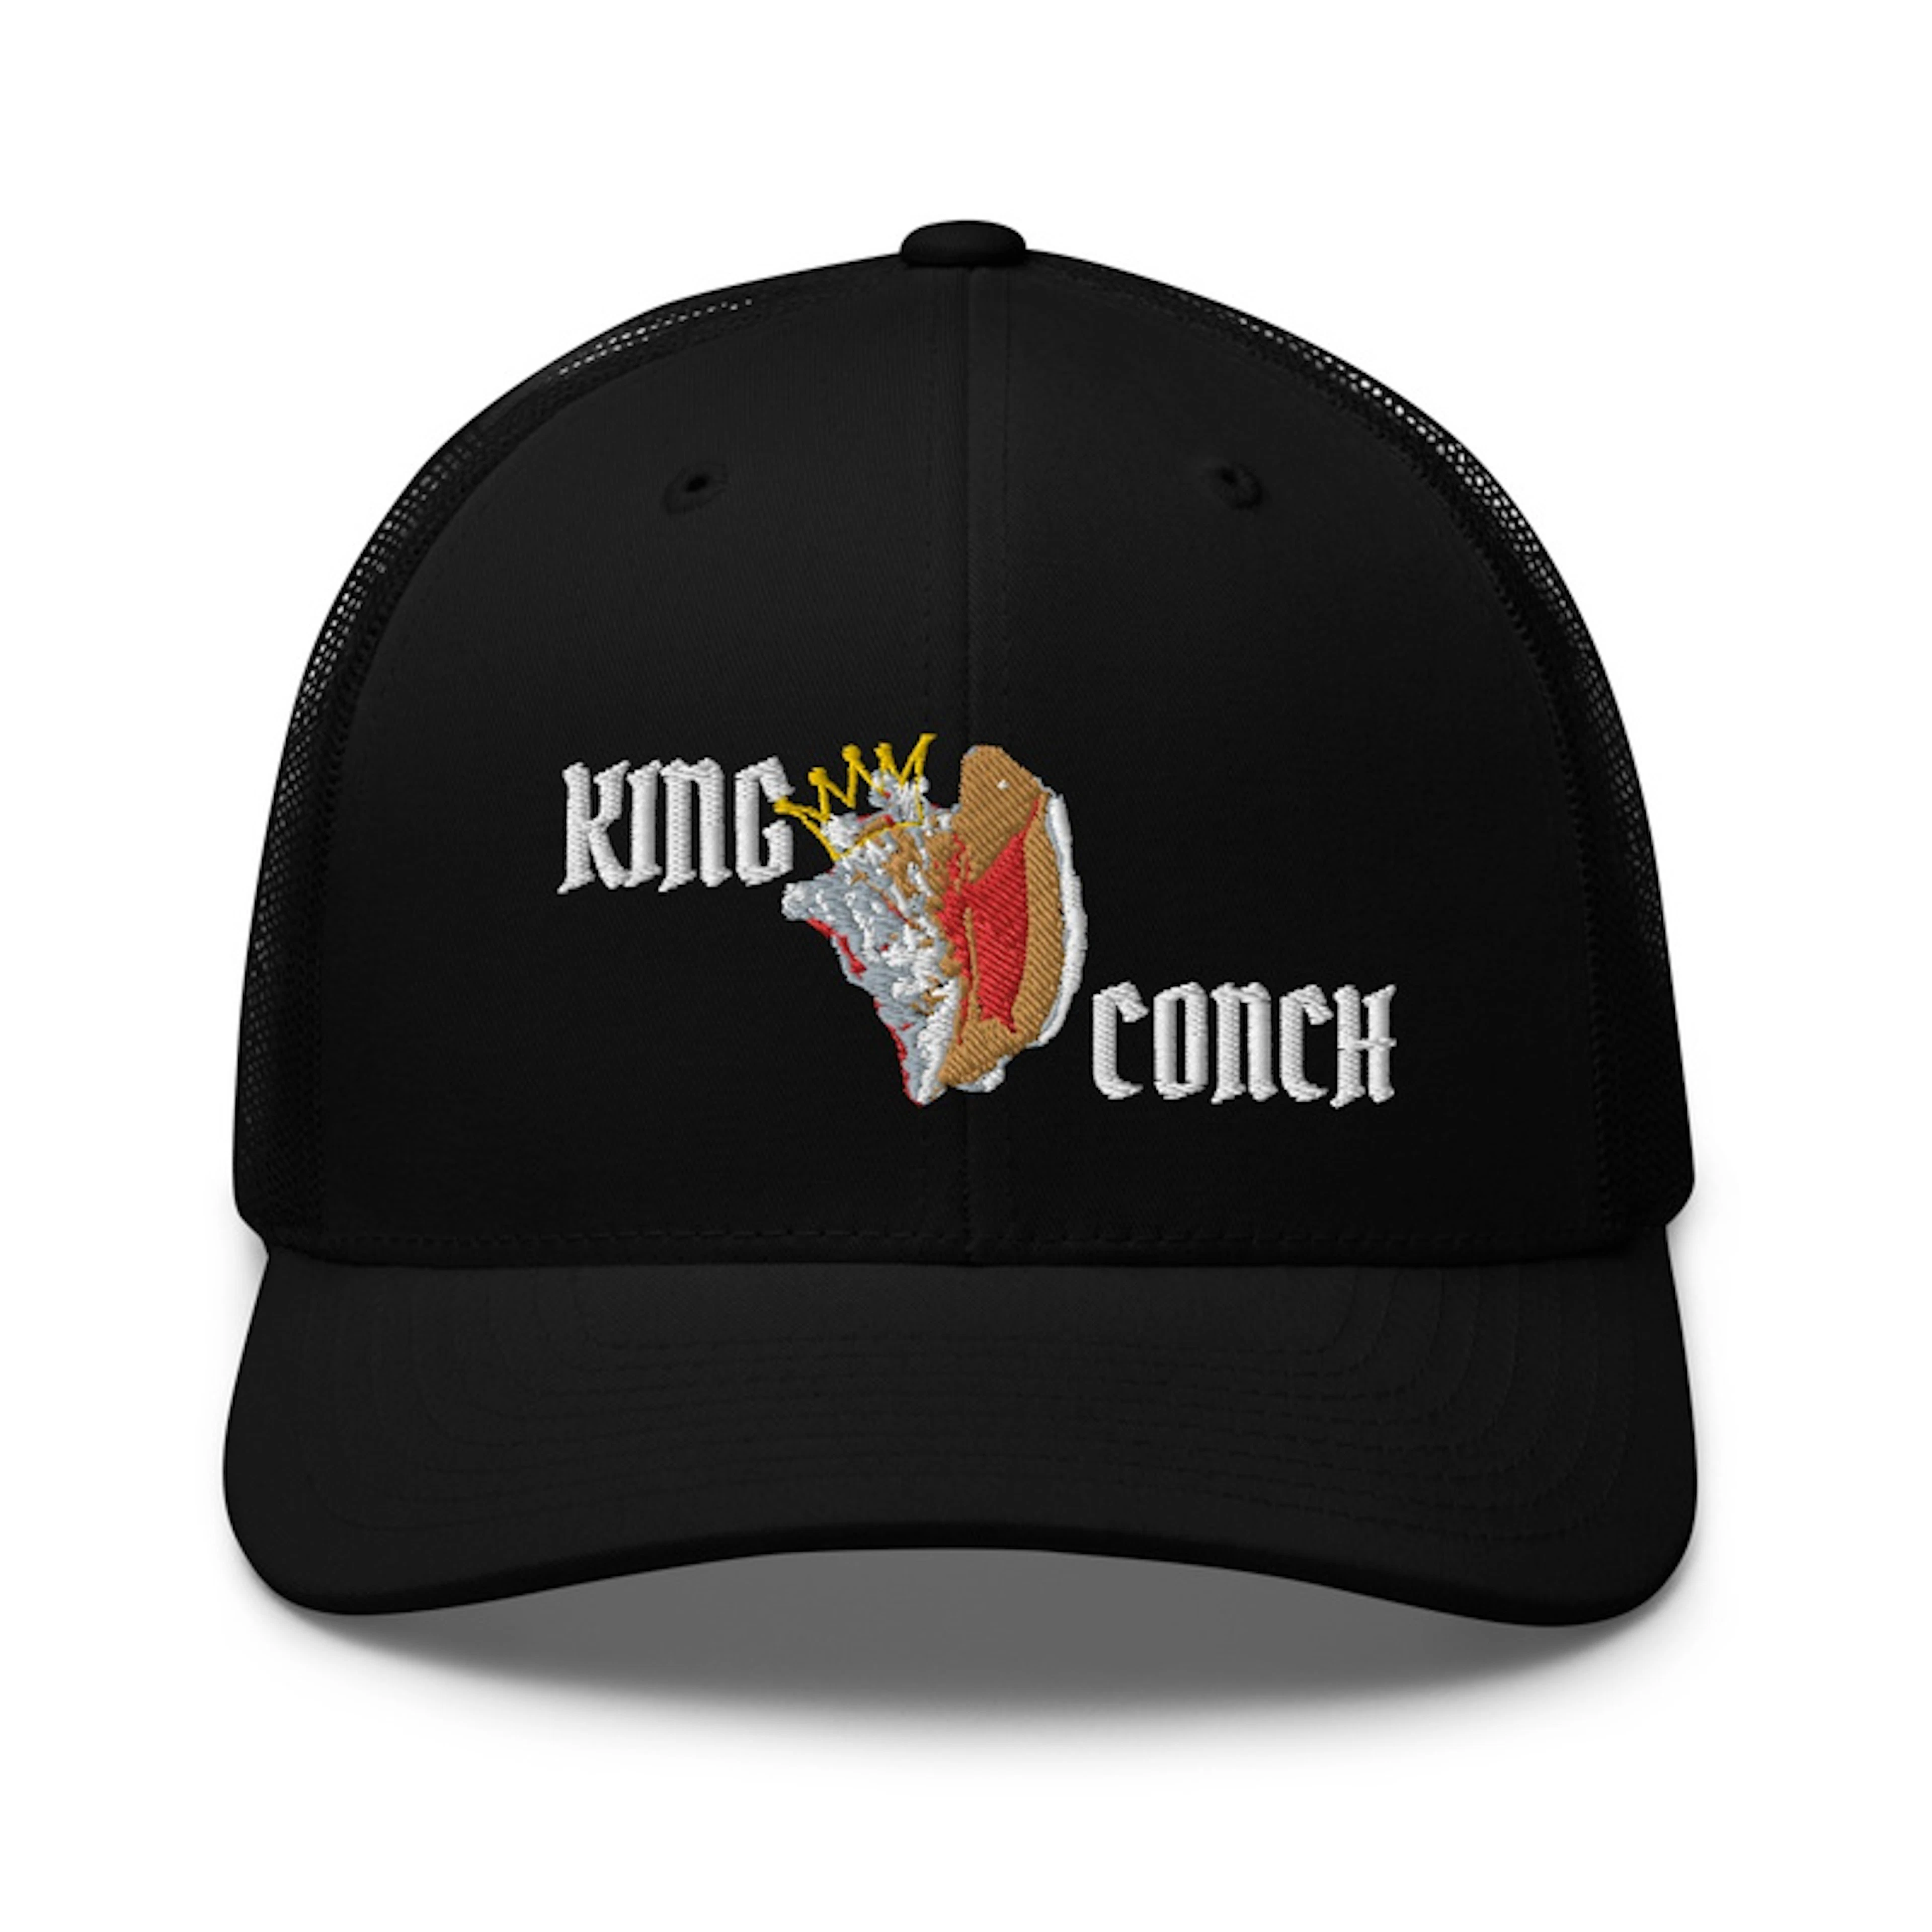 KING CONCH